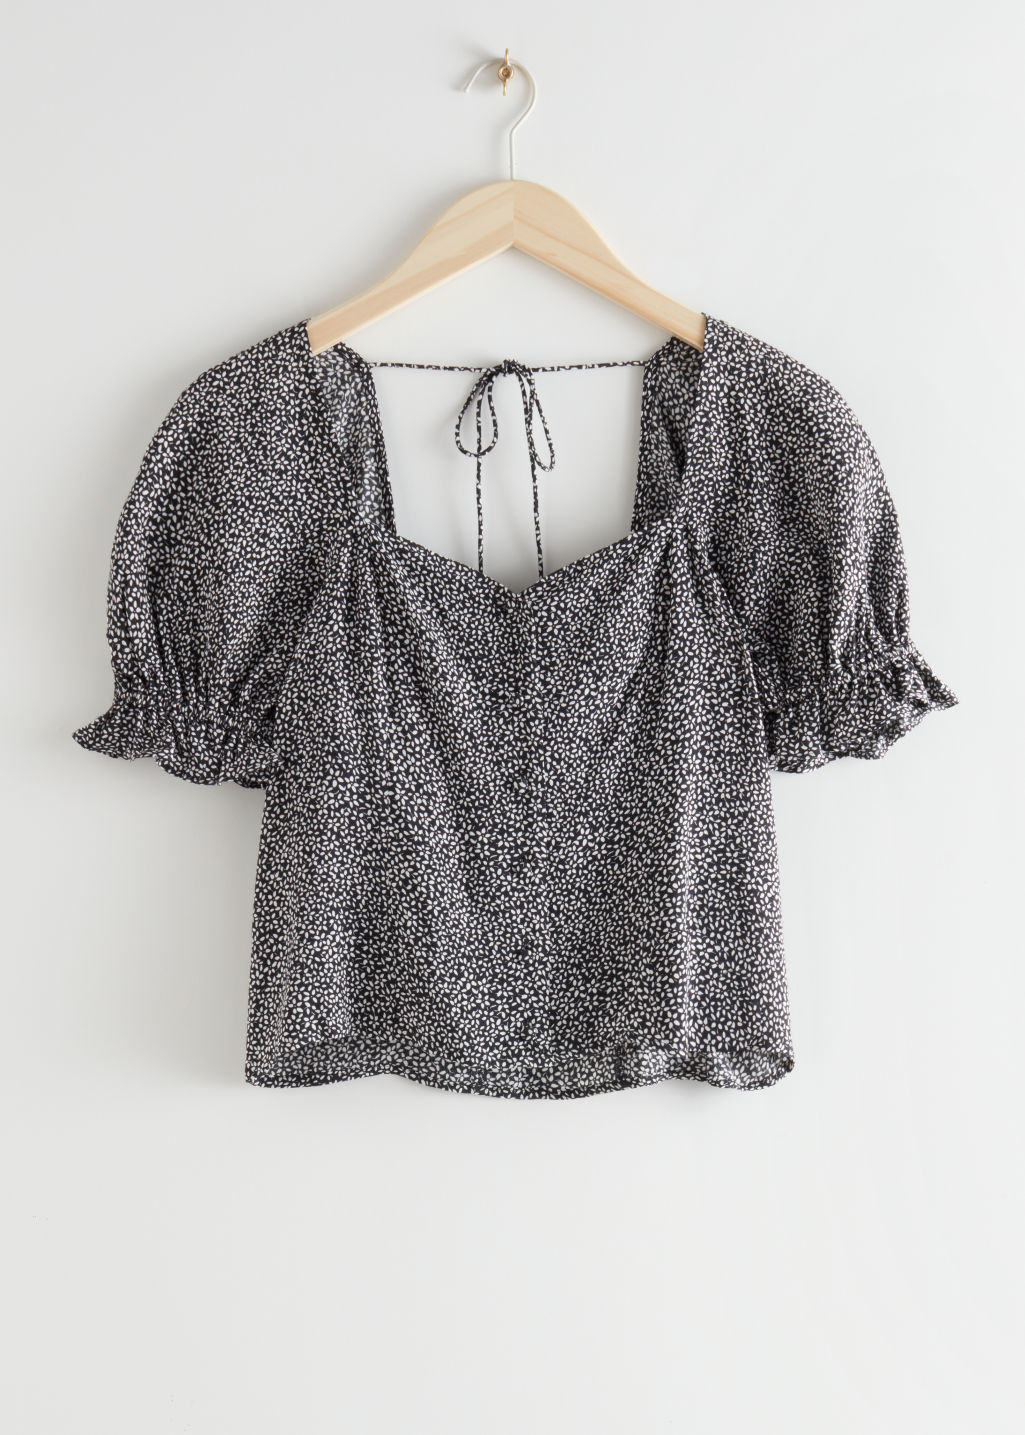 Flounced Sleeve Top - Black Print - Tops & T-shirts - & Other Stories